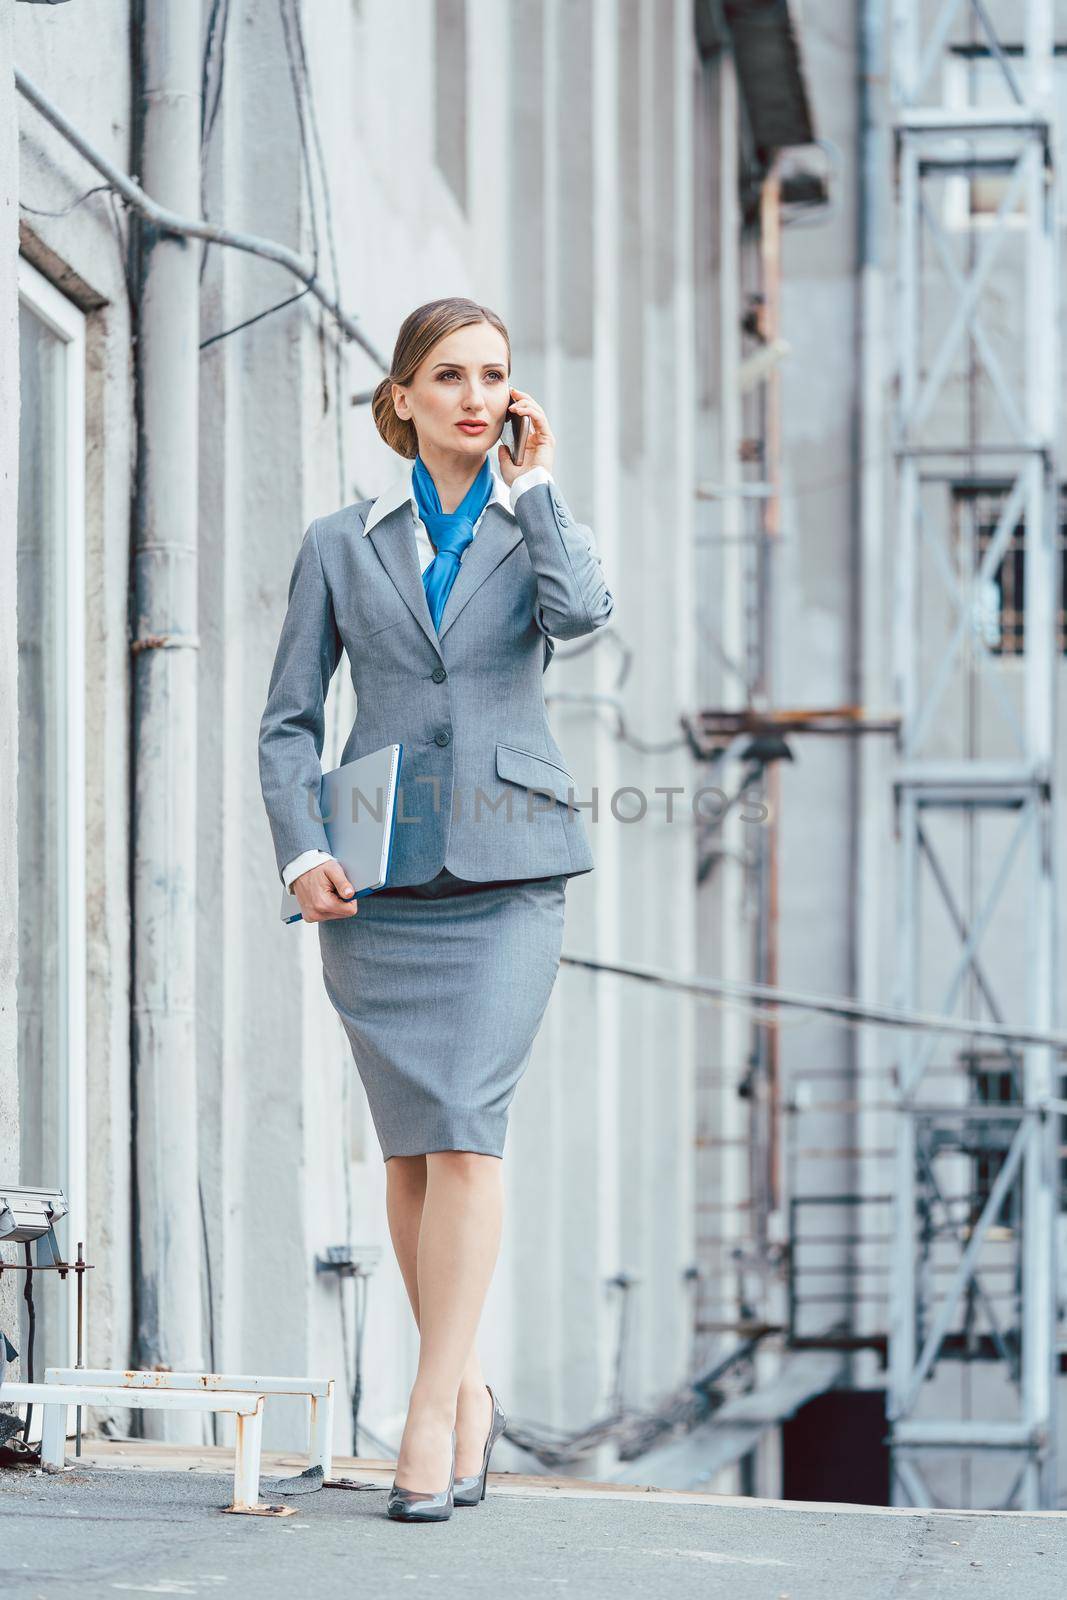 Business woman using her phone in an industrial environment by Kzenon